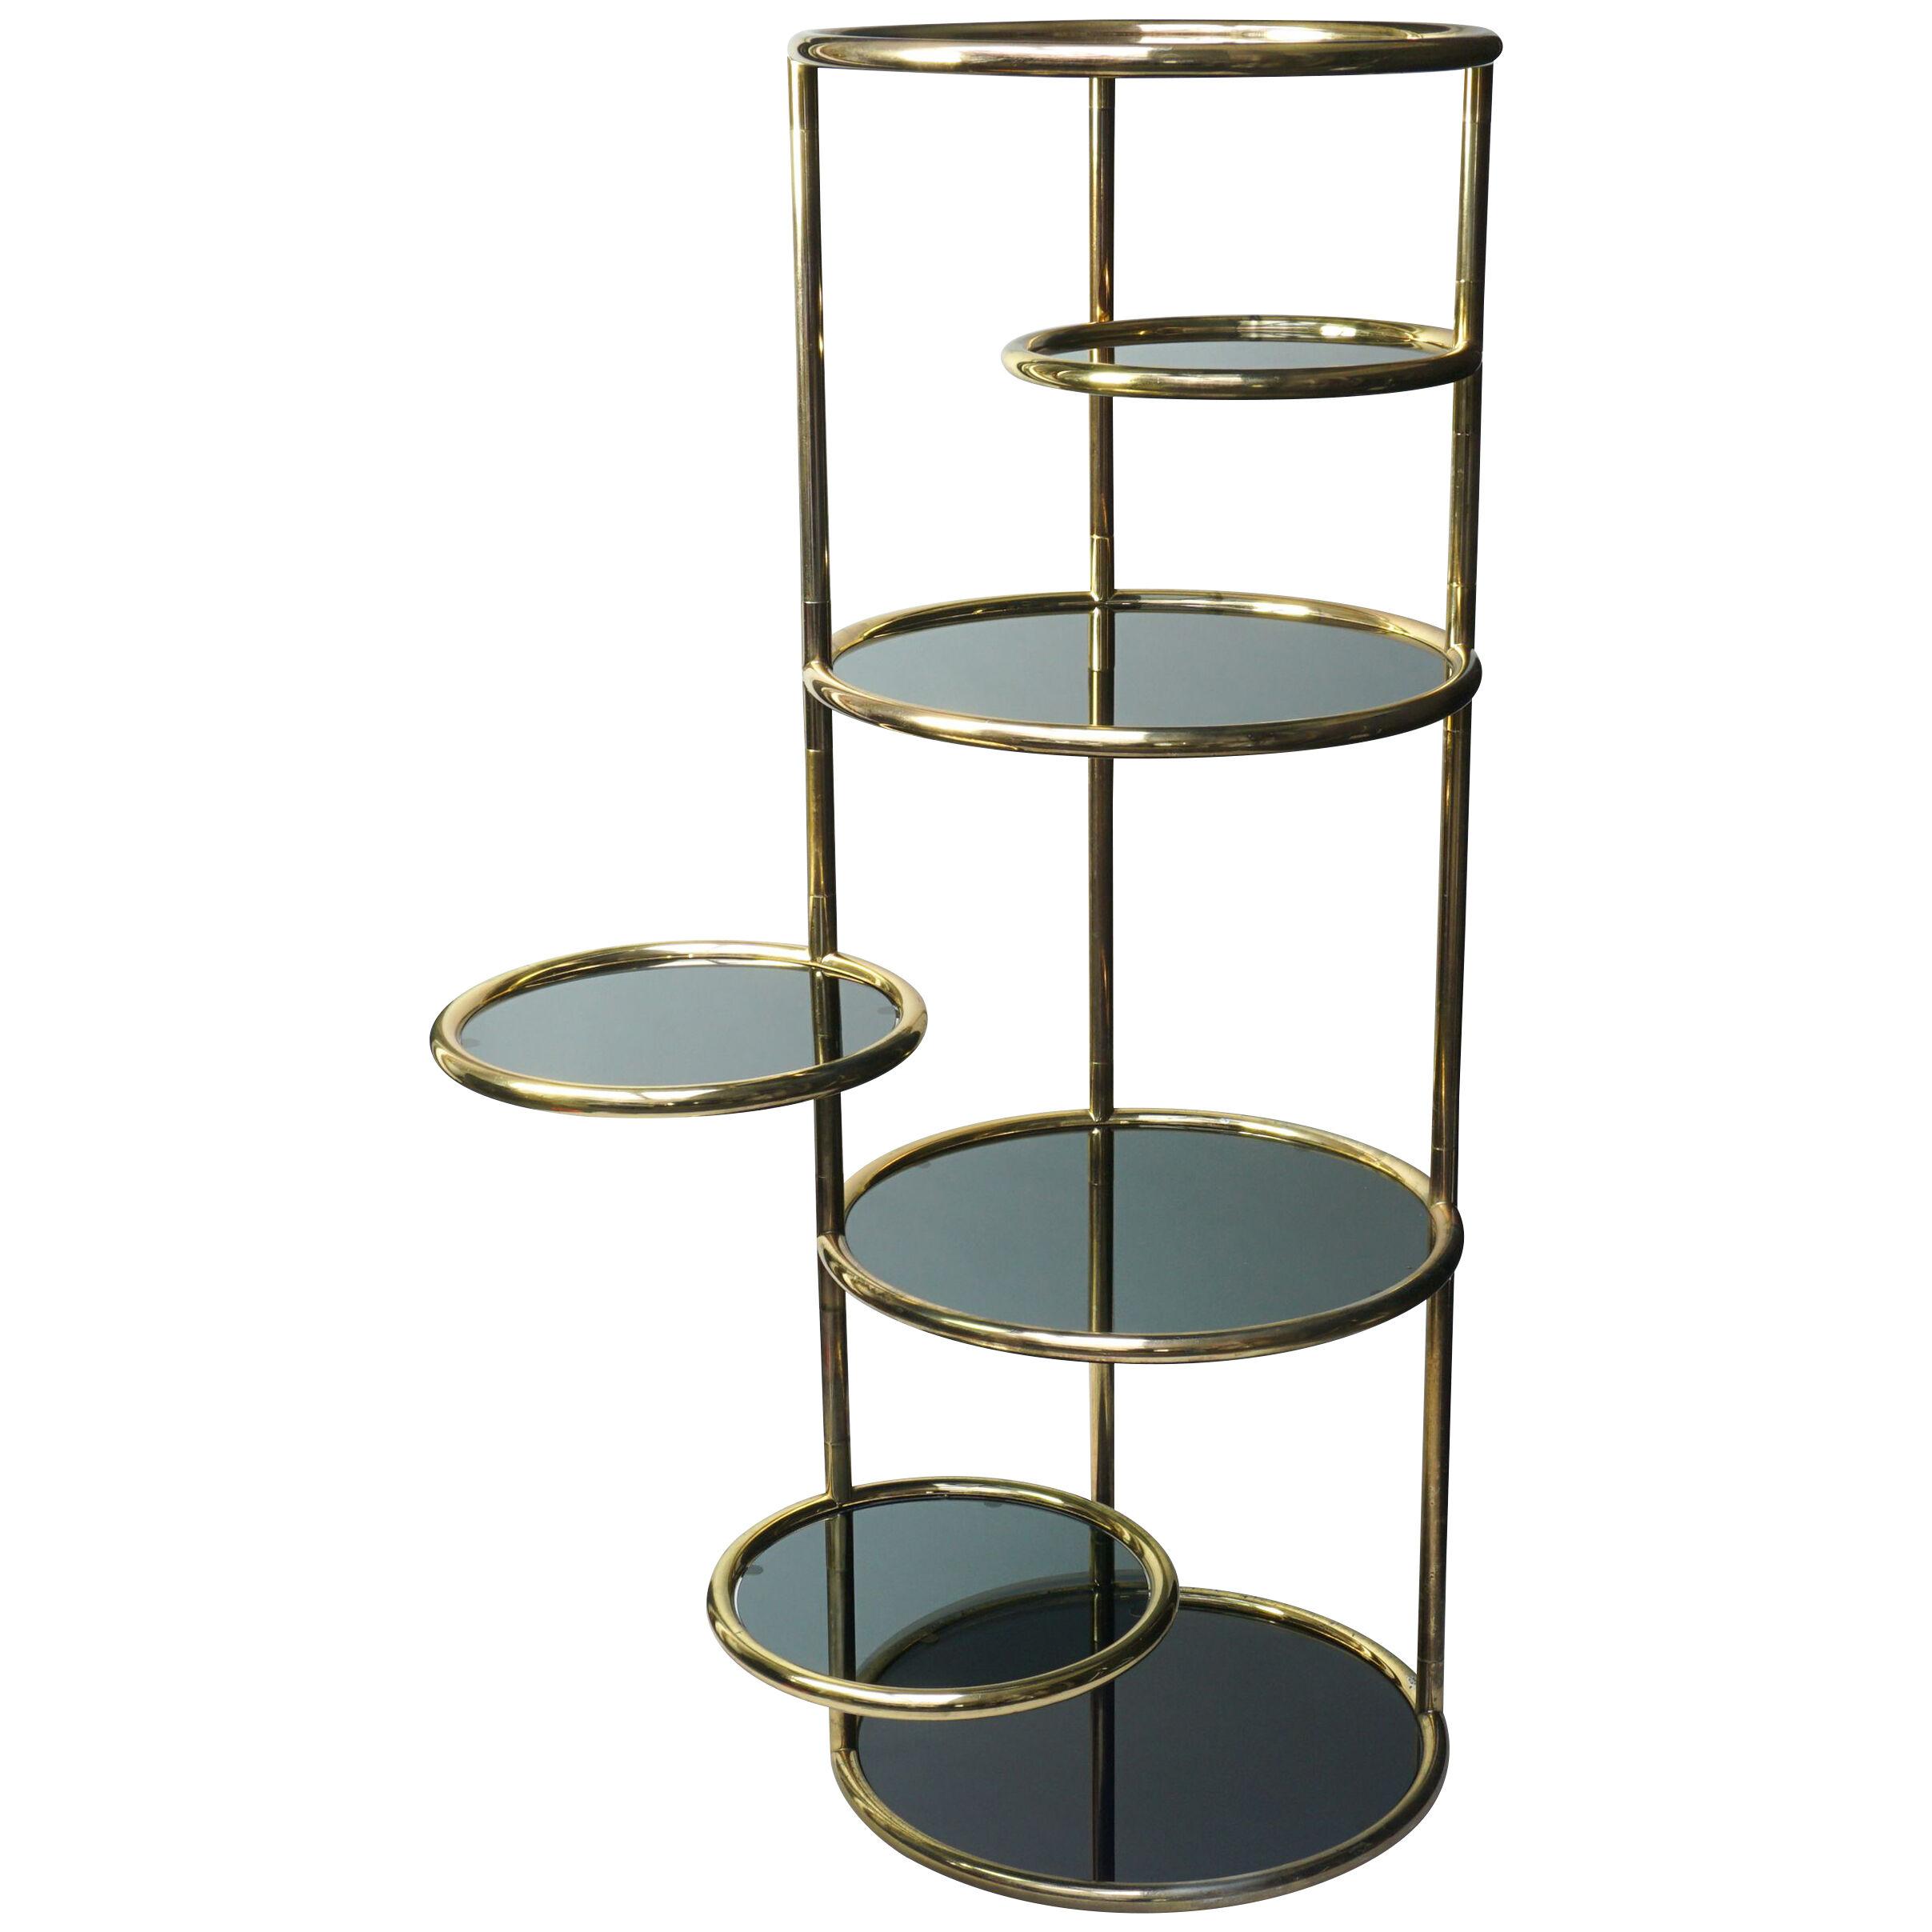 Large 1960s Milo Baughman Style Seven Tiered Brass Smoked Glass Swivel Étagère